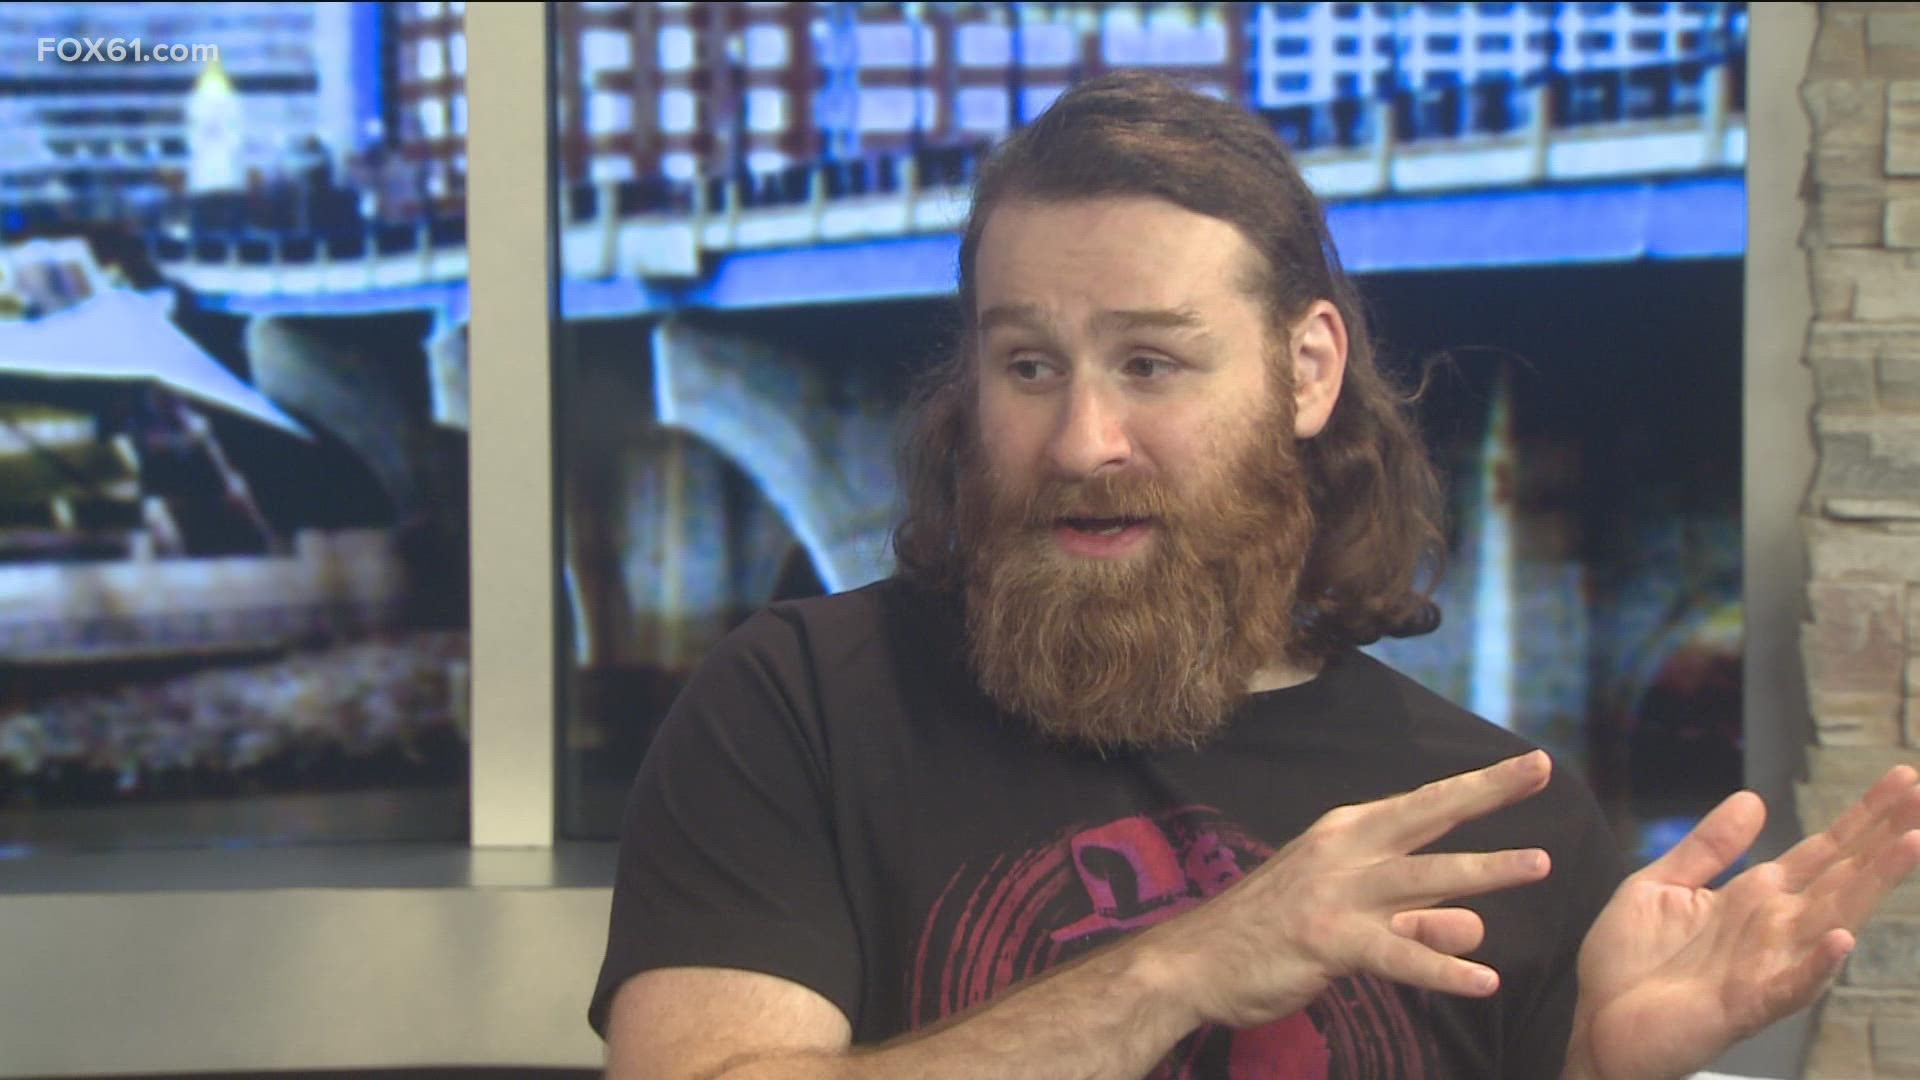 Sami Zayn is in Studio61 to talk about WWE Smackdown! coming to the XL Center.